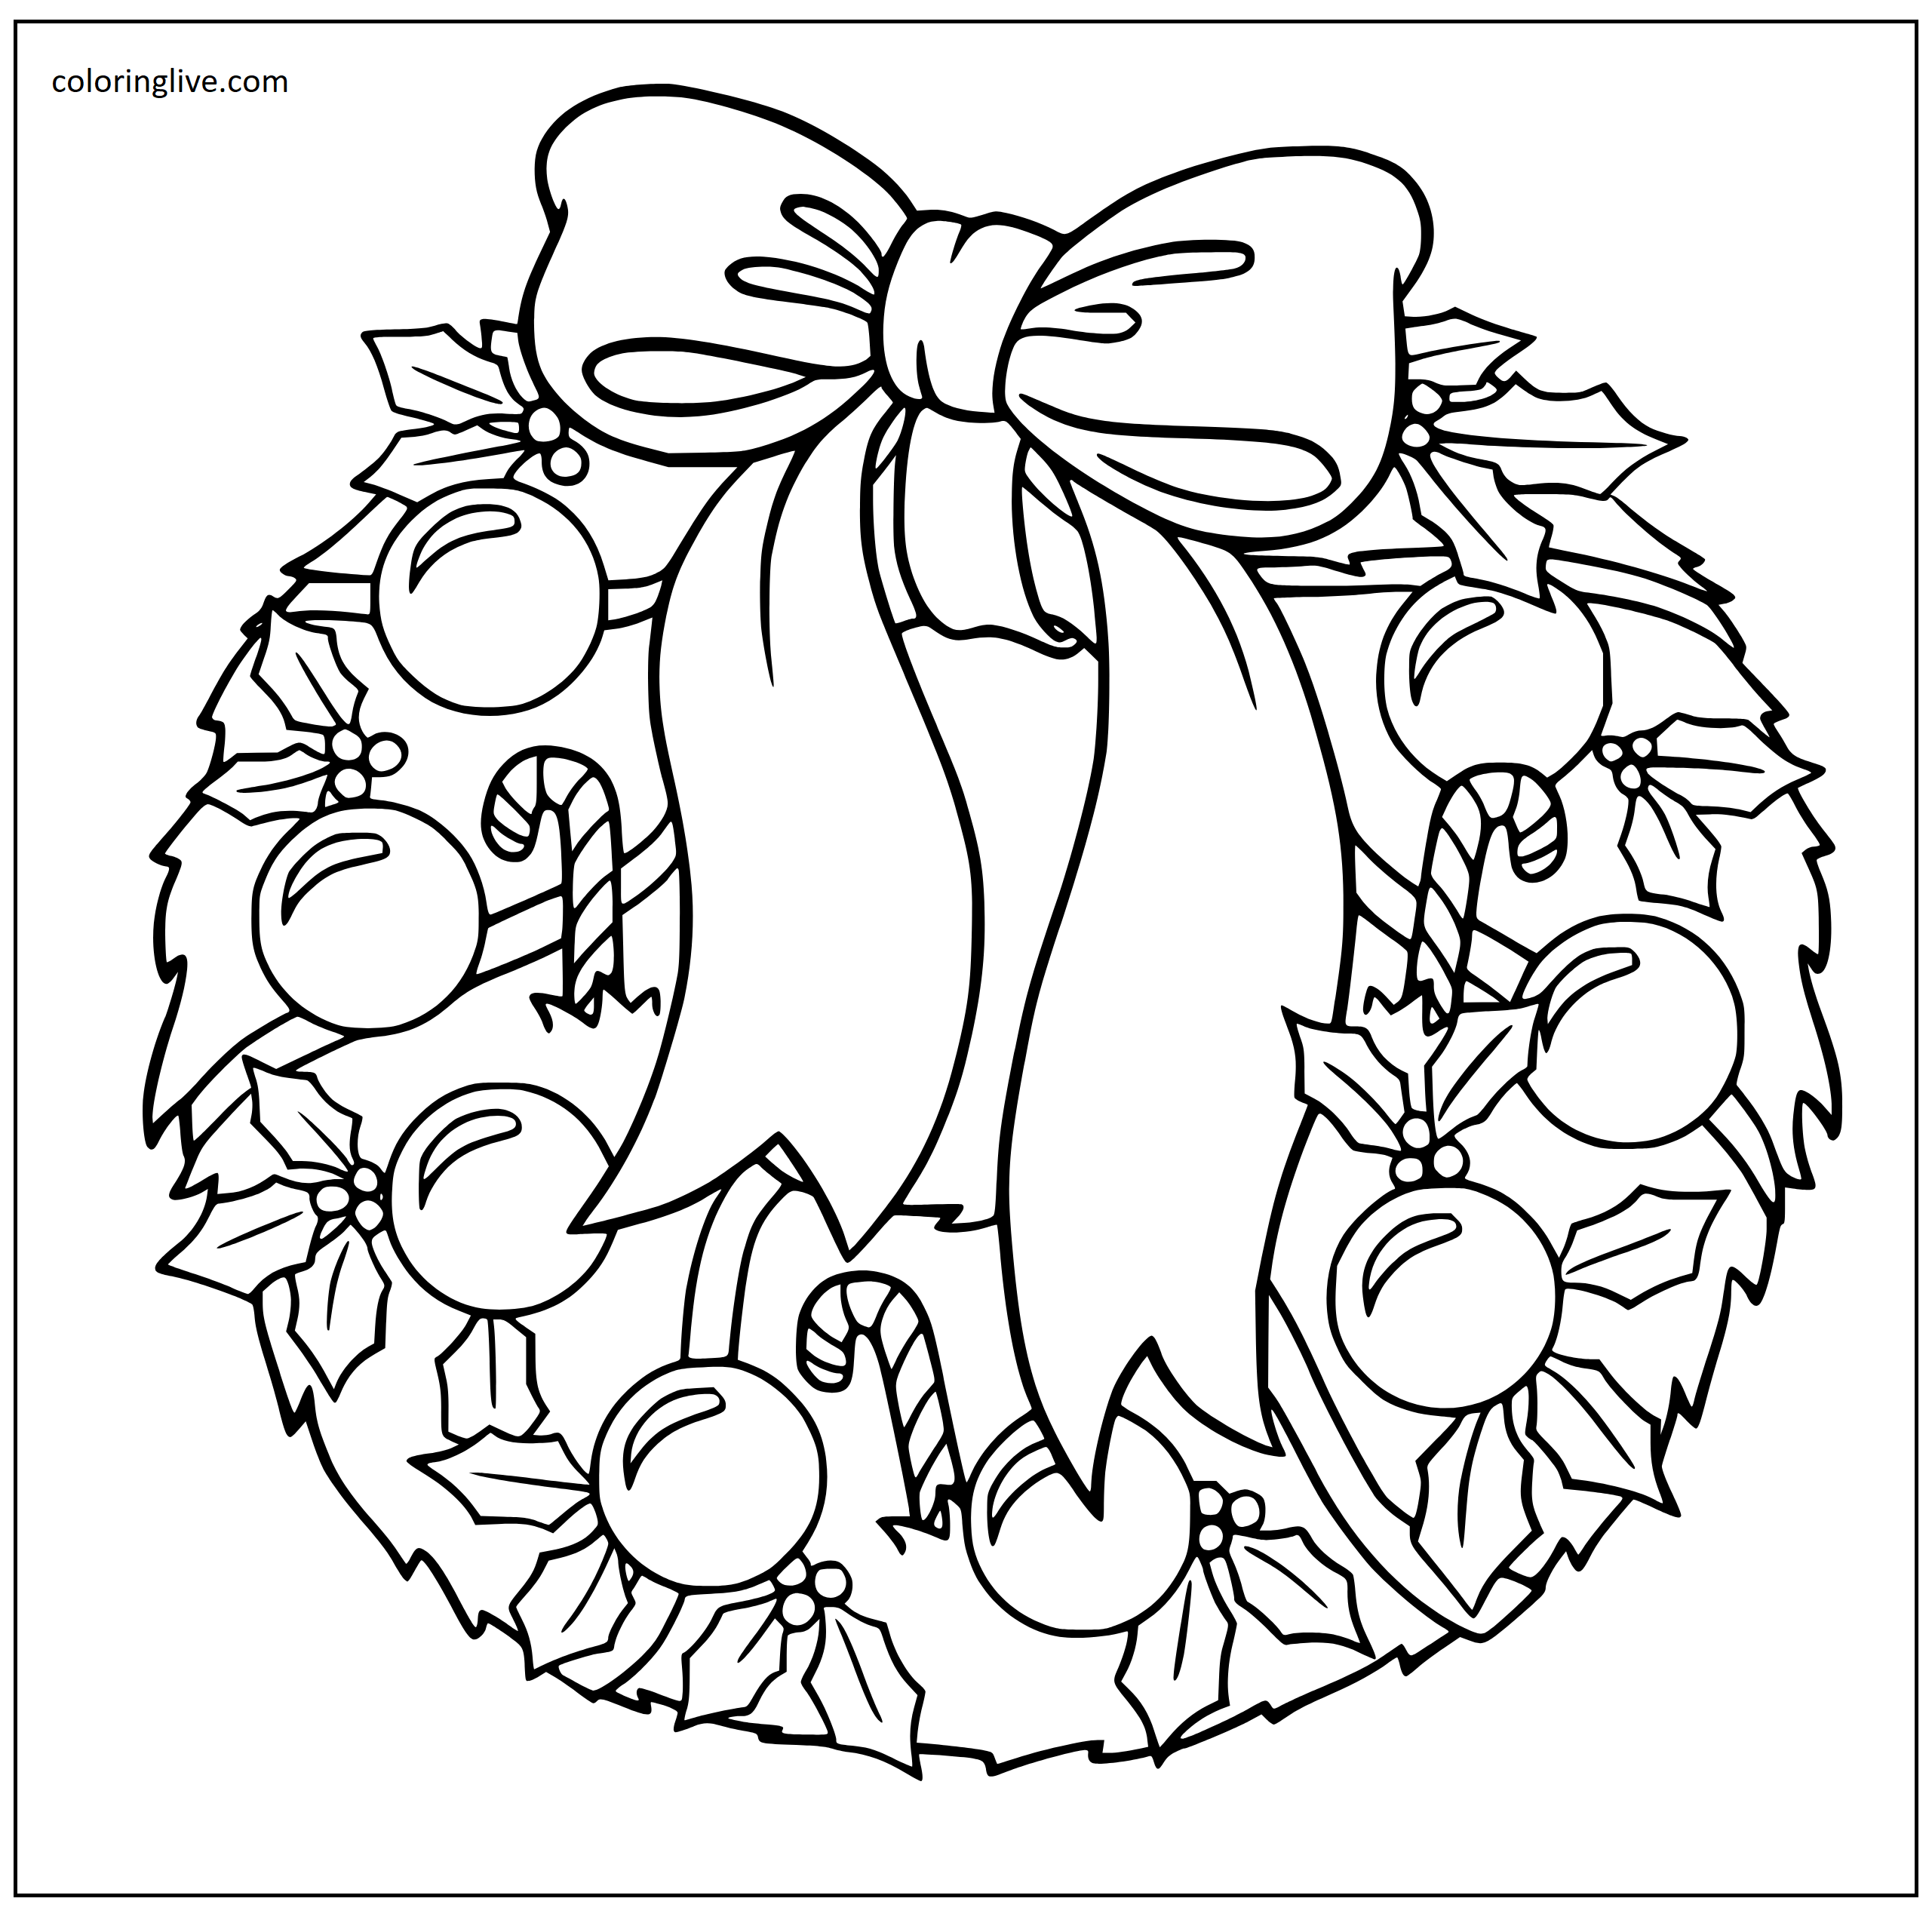 Printable a Beautiful Christmas Wreath Coloring Page for kids.